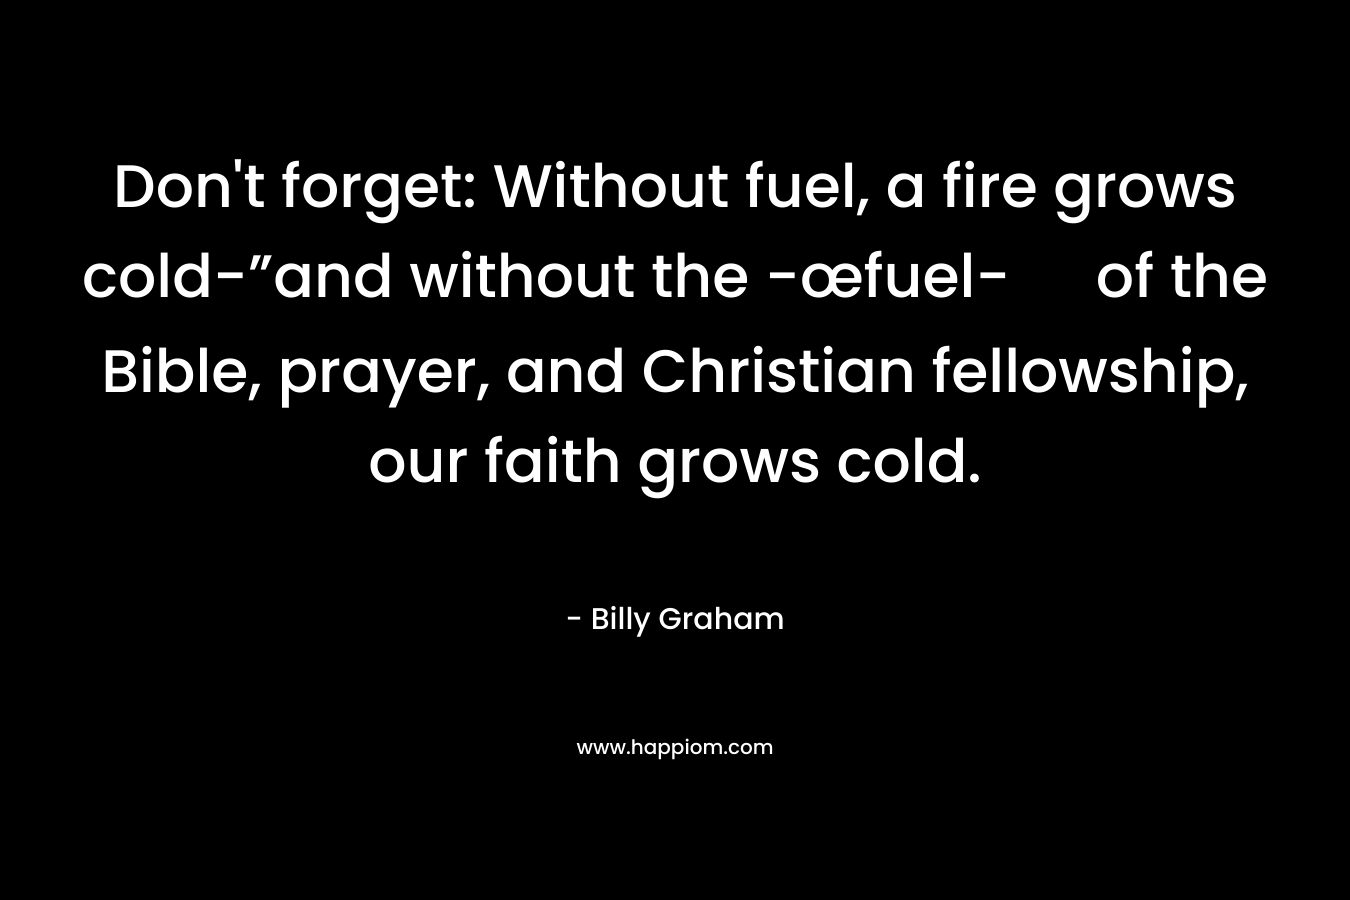 Don’t forget: Without fuel, a fire grows cold-”and without the -œfuel- of the Bible, prayer, and Christian fellowship, our faith grows cold. – Billy Graham